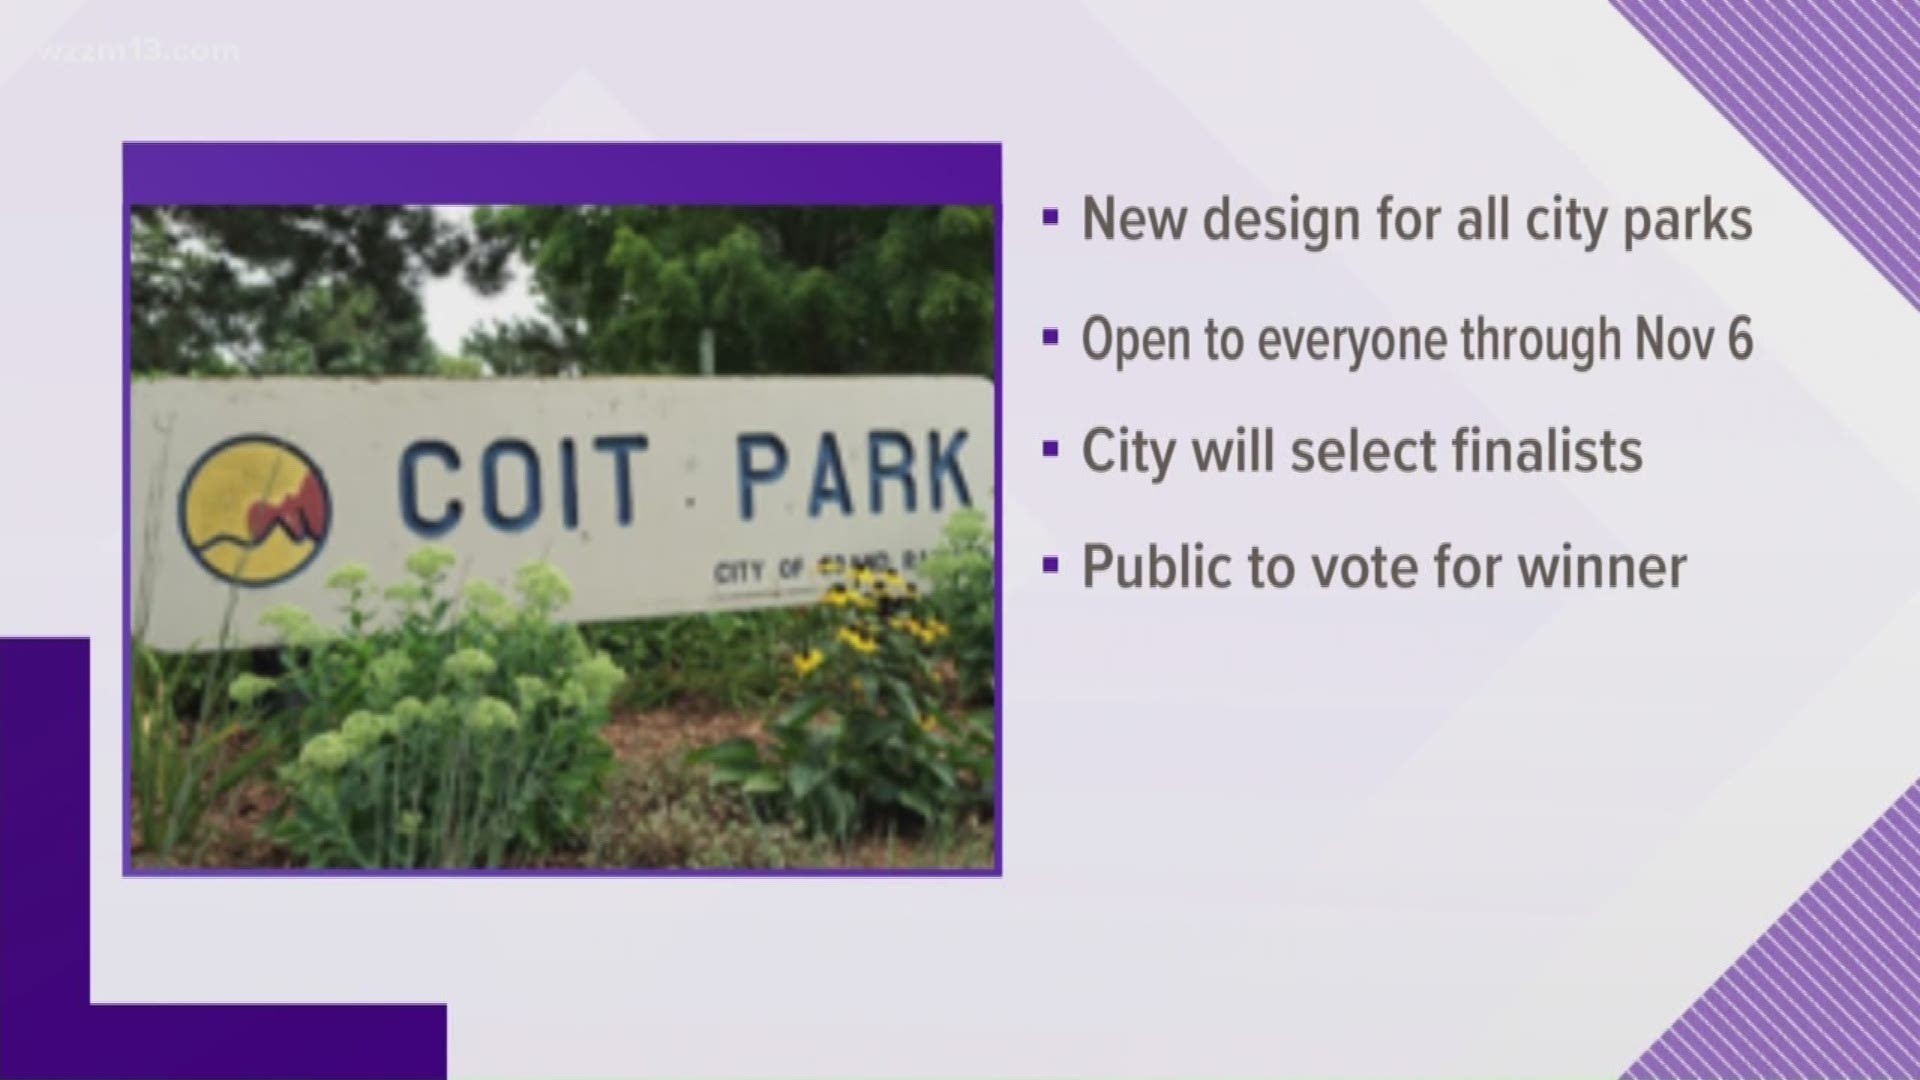 Grand Rapids Parks sign redesign competition